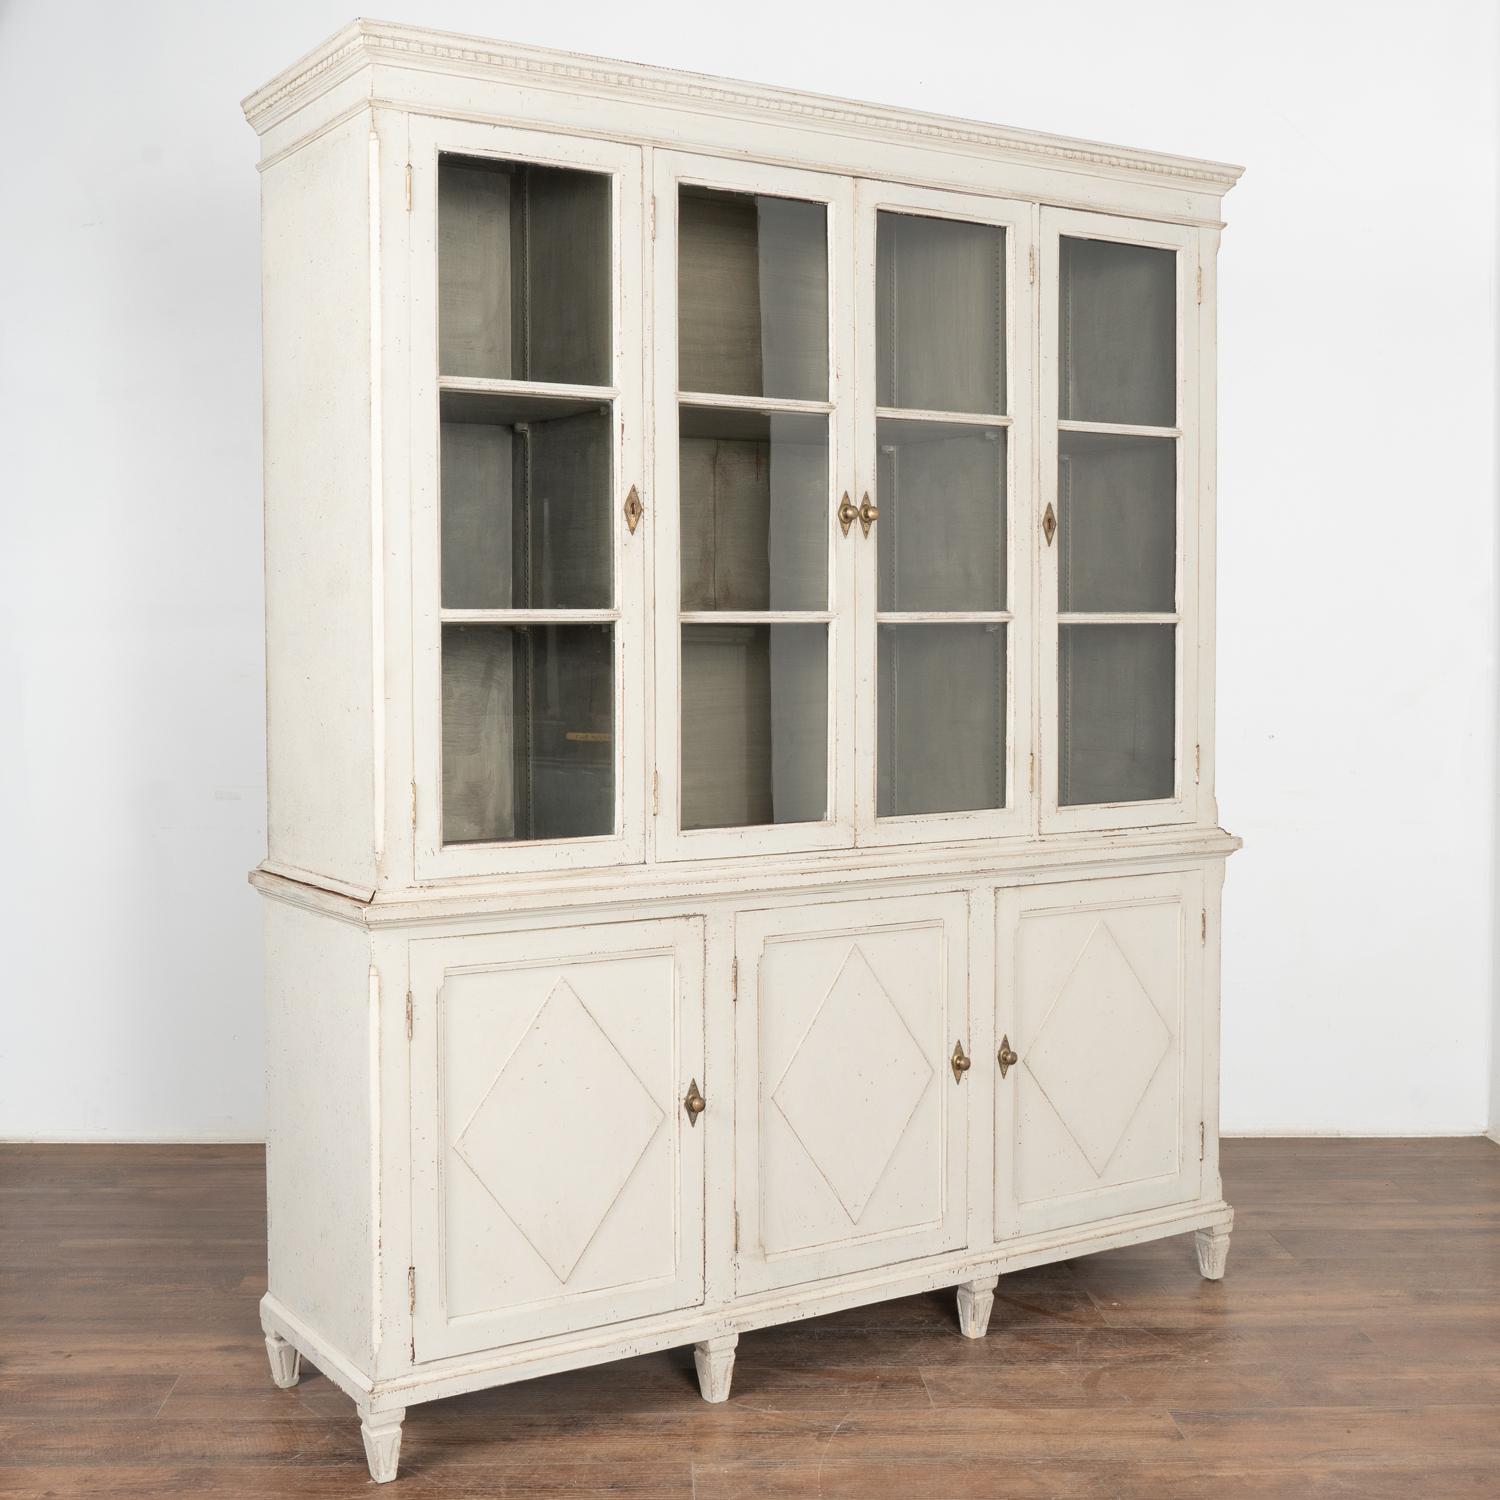 Elegant and stately Swedish Gustavian style display cabinet or bookcase in two sections standing just under 7' tall.
Newer professional painted finish in softly distressed light grey fitting the age and grace of this timeless piece.
Adjustable